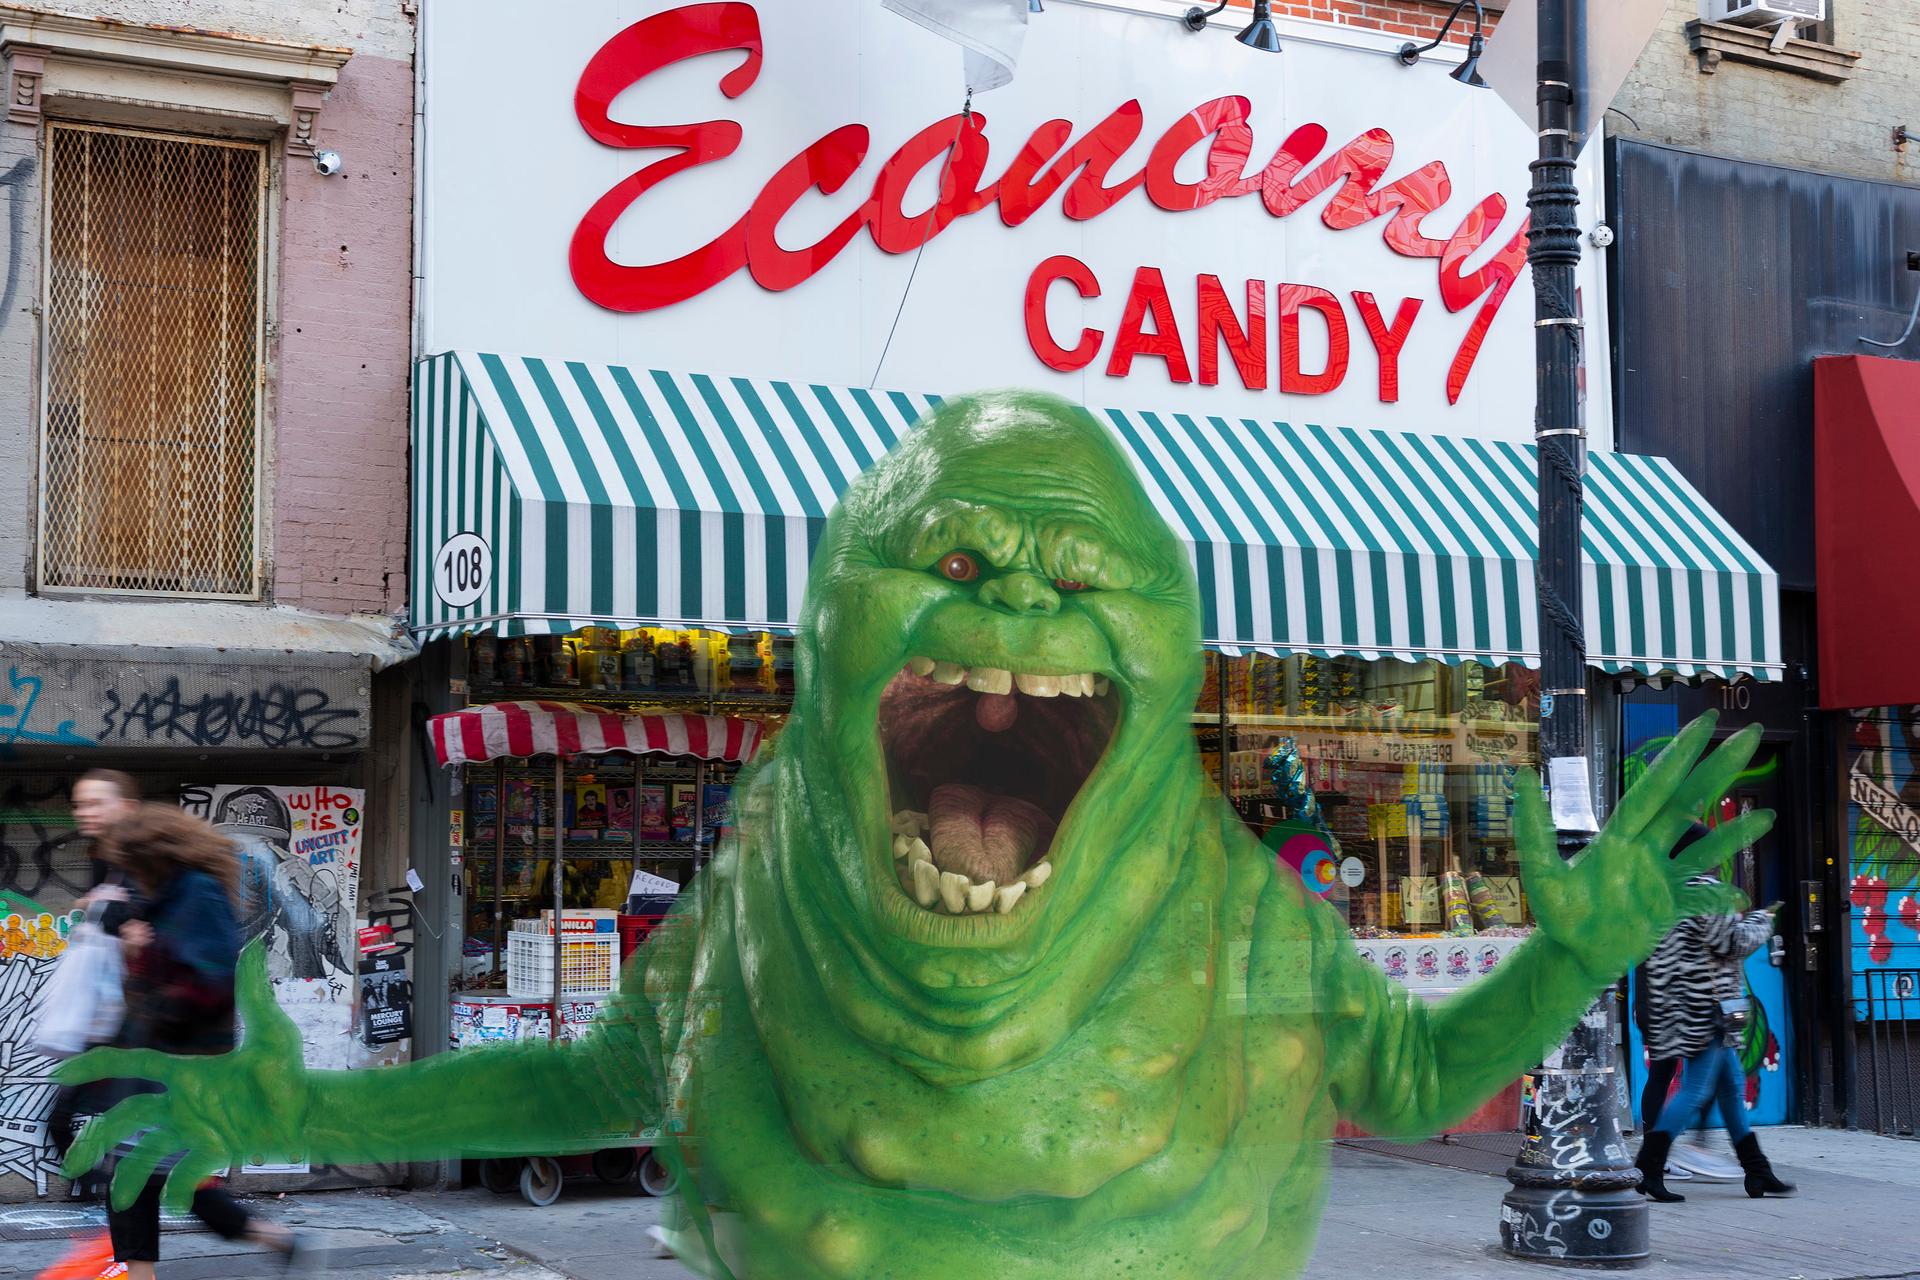 Slimer from Ghostbusters in front of Economy Candy